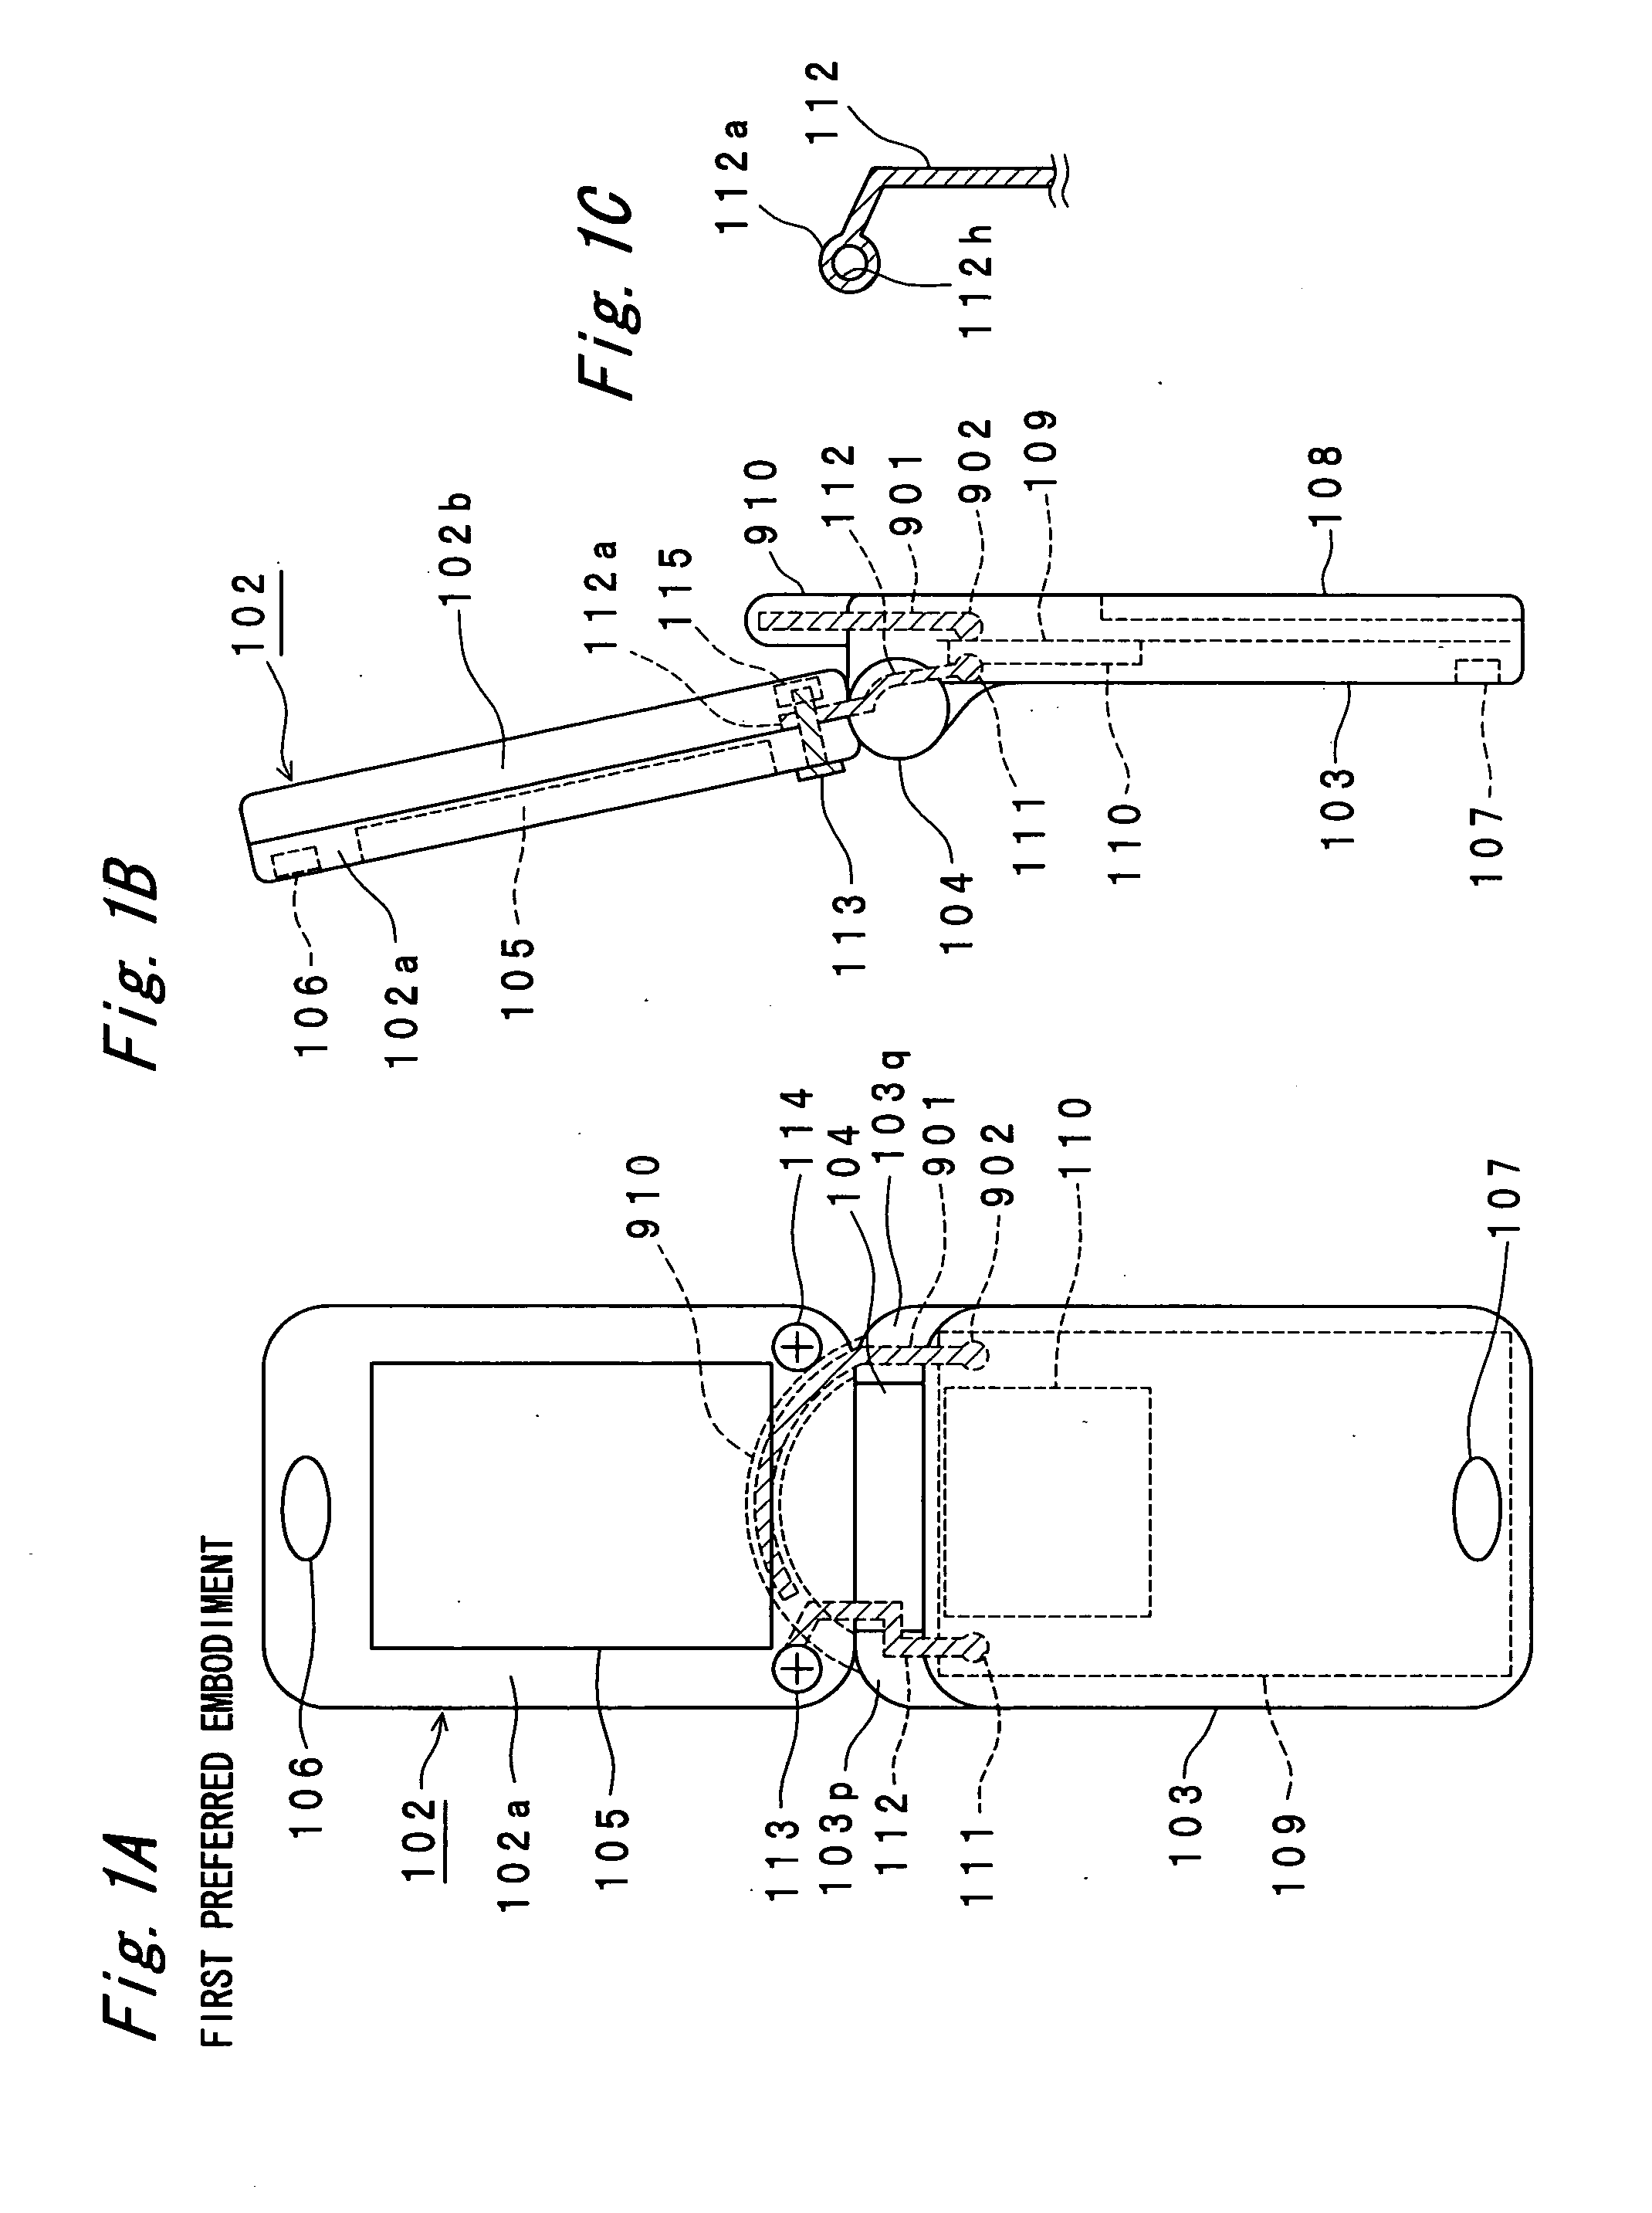 Portable radio communication apparatus provided with a part of housing operating as an antenna